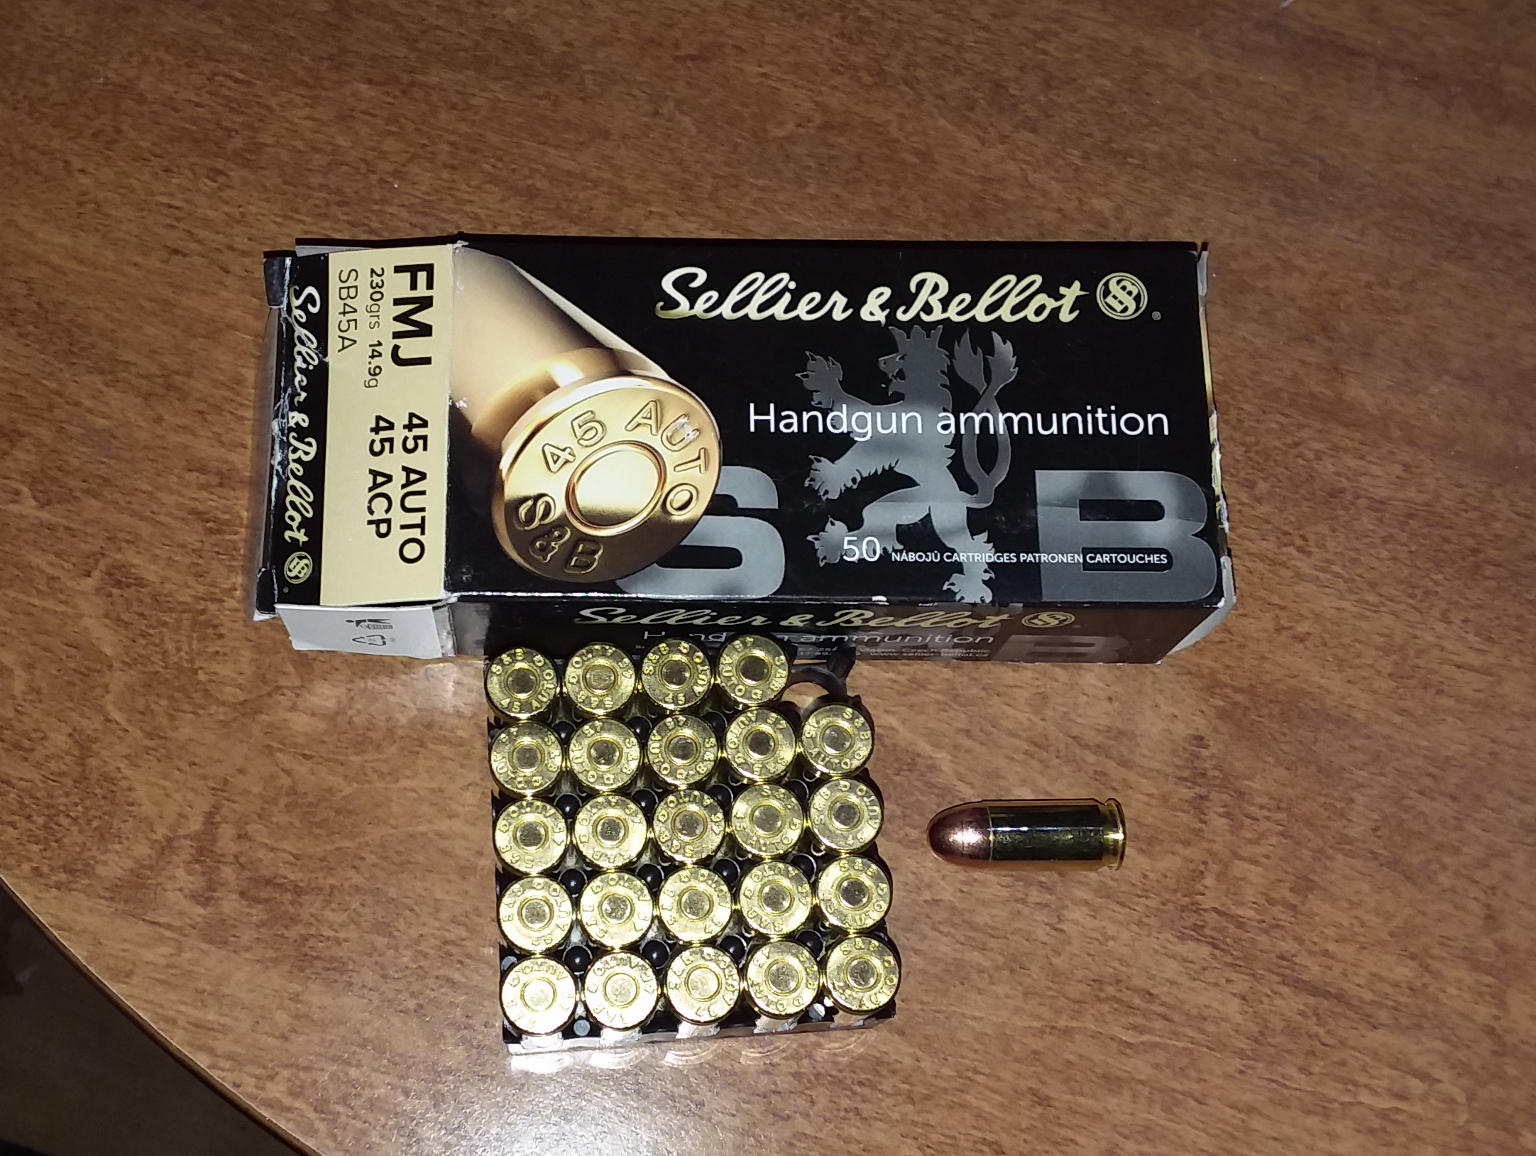 As I said above, the seller threw in a full box of 45 ACP ammo when I bough...